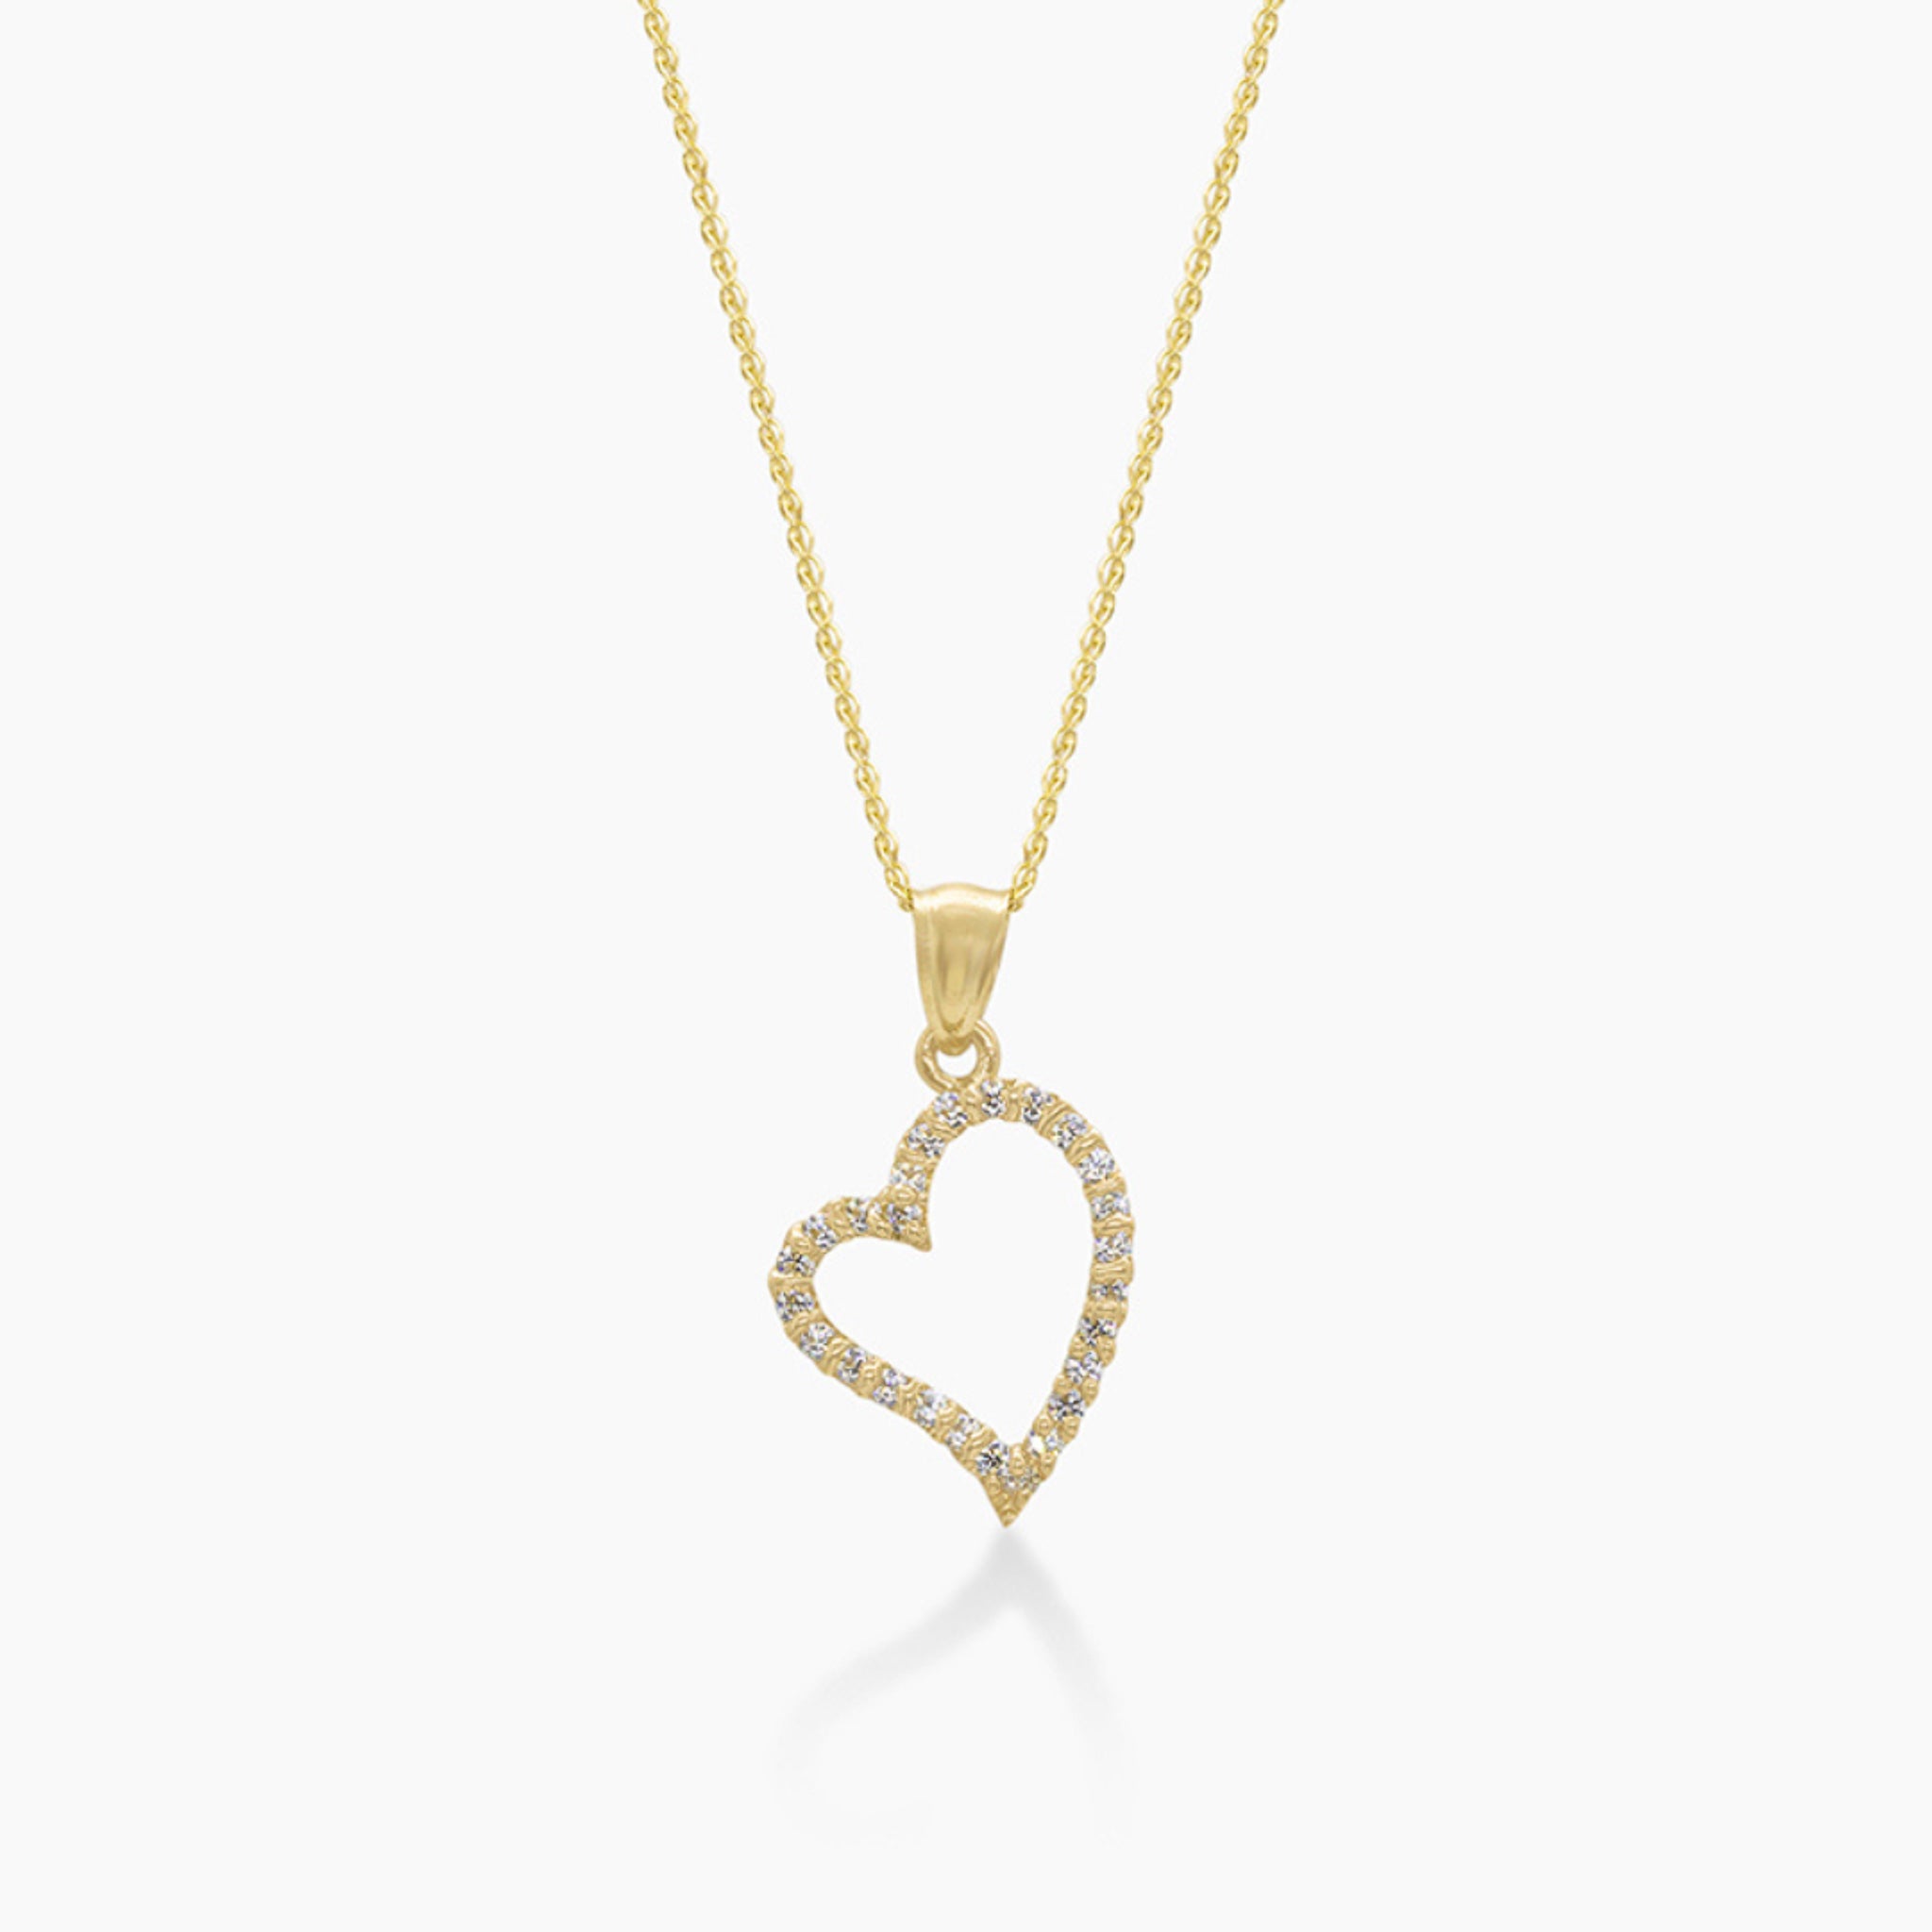 14K YELLOW GOLD GENTLE HEART NECKLACE